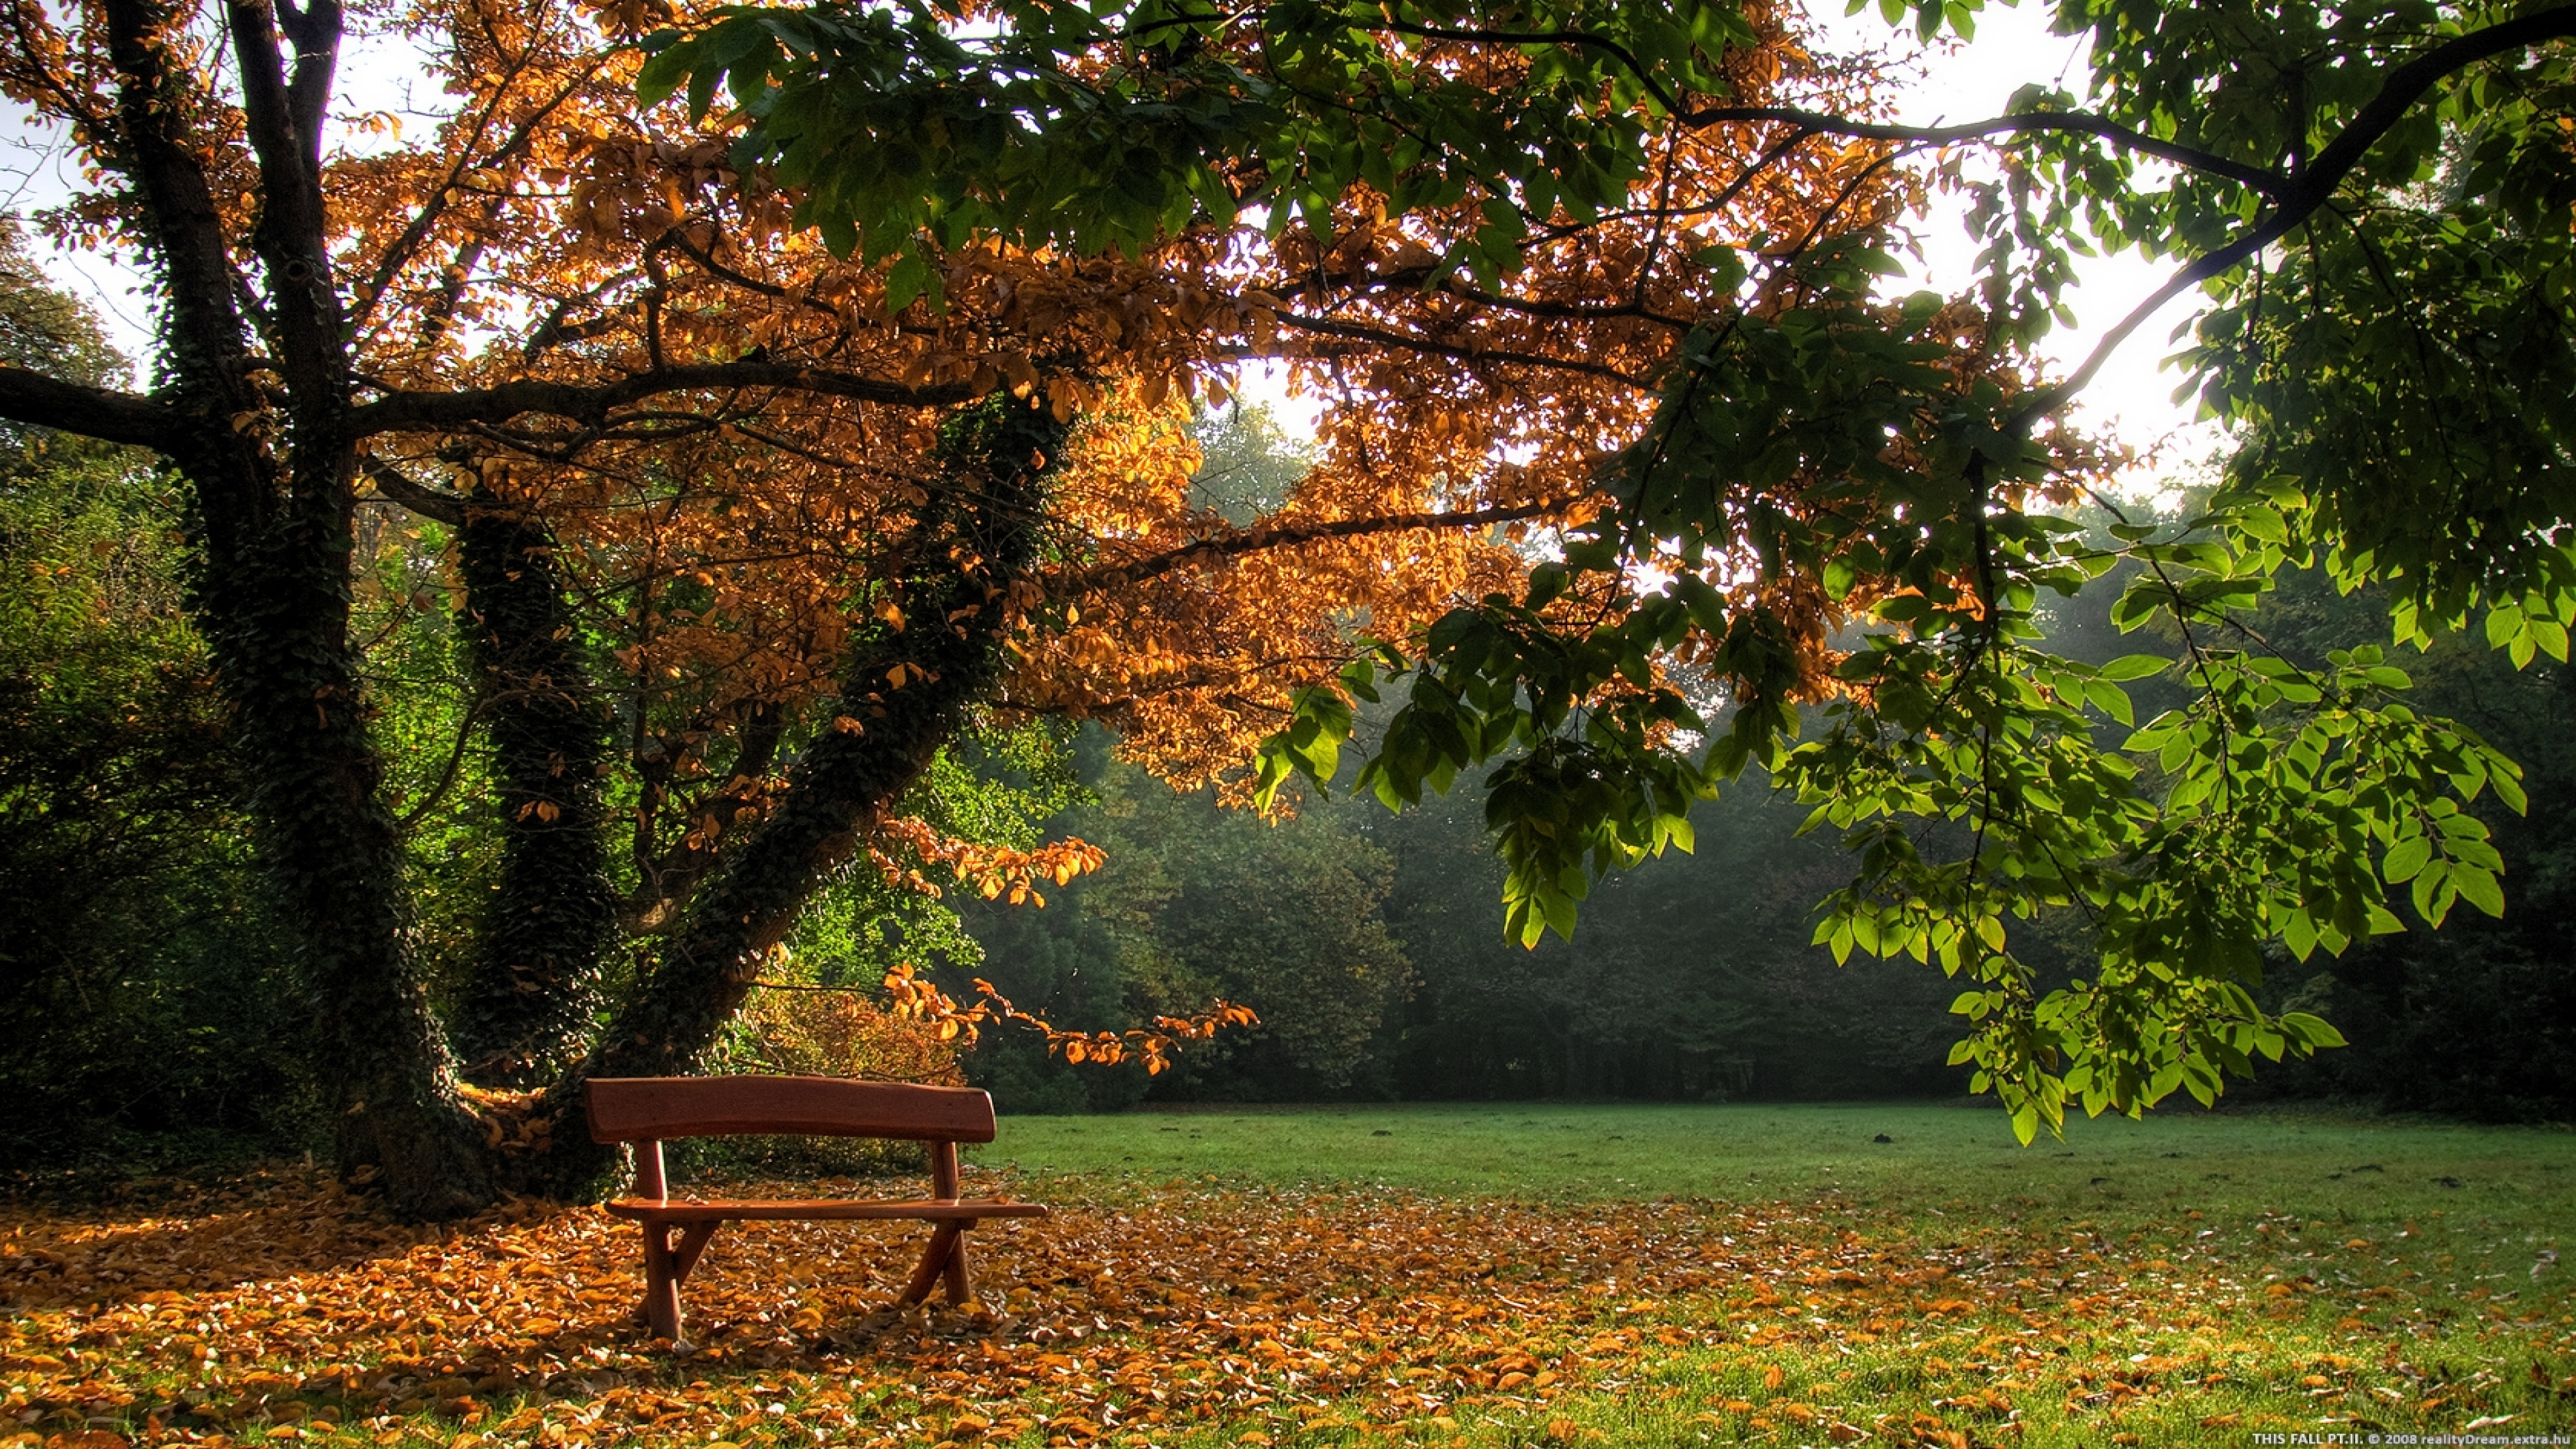 Brown Wooden Bench And Autumn Leaves On Grass Covered Field Near Tree During Daytime K 2K Nature